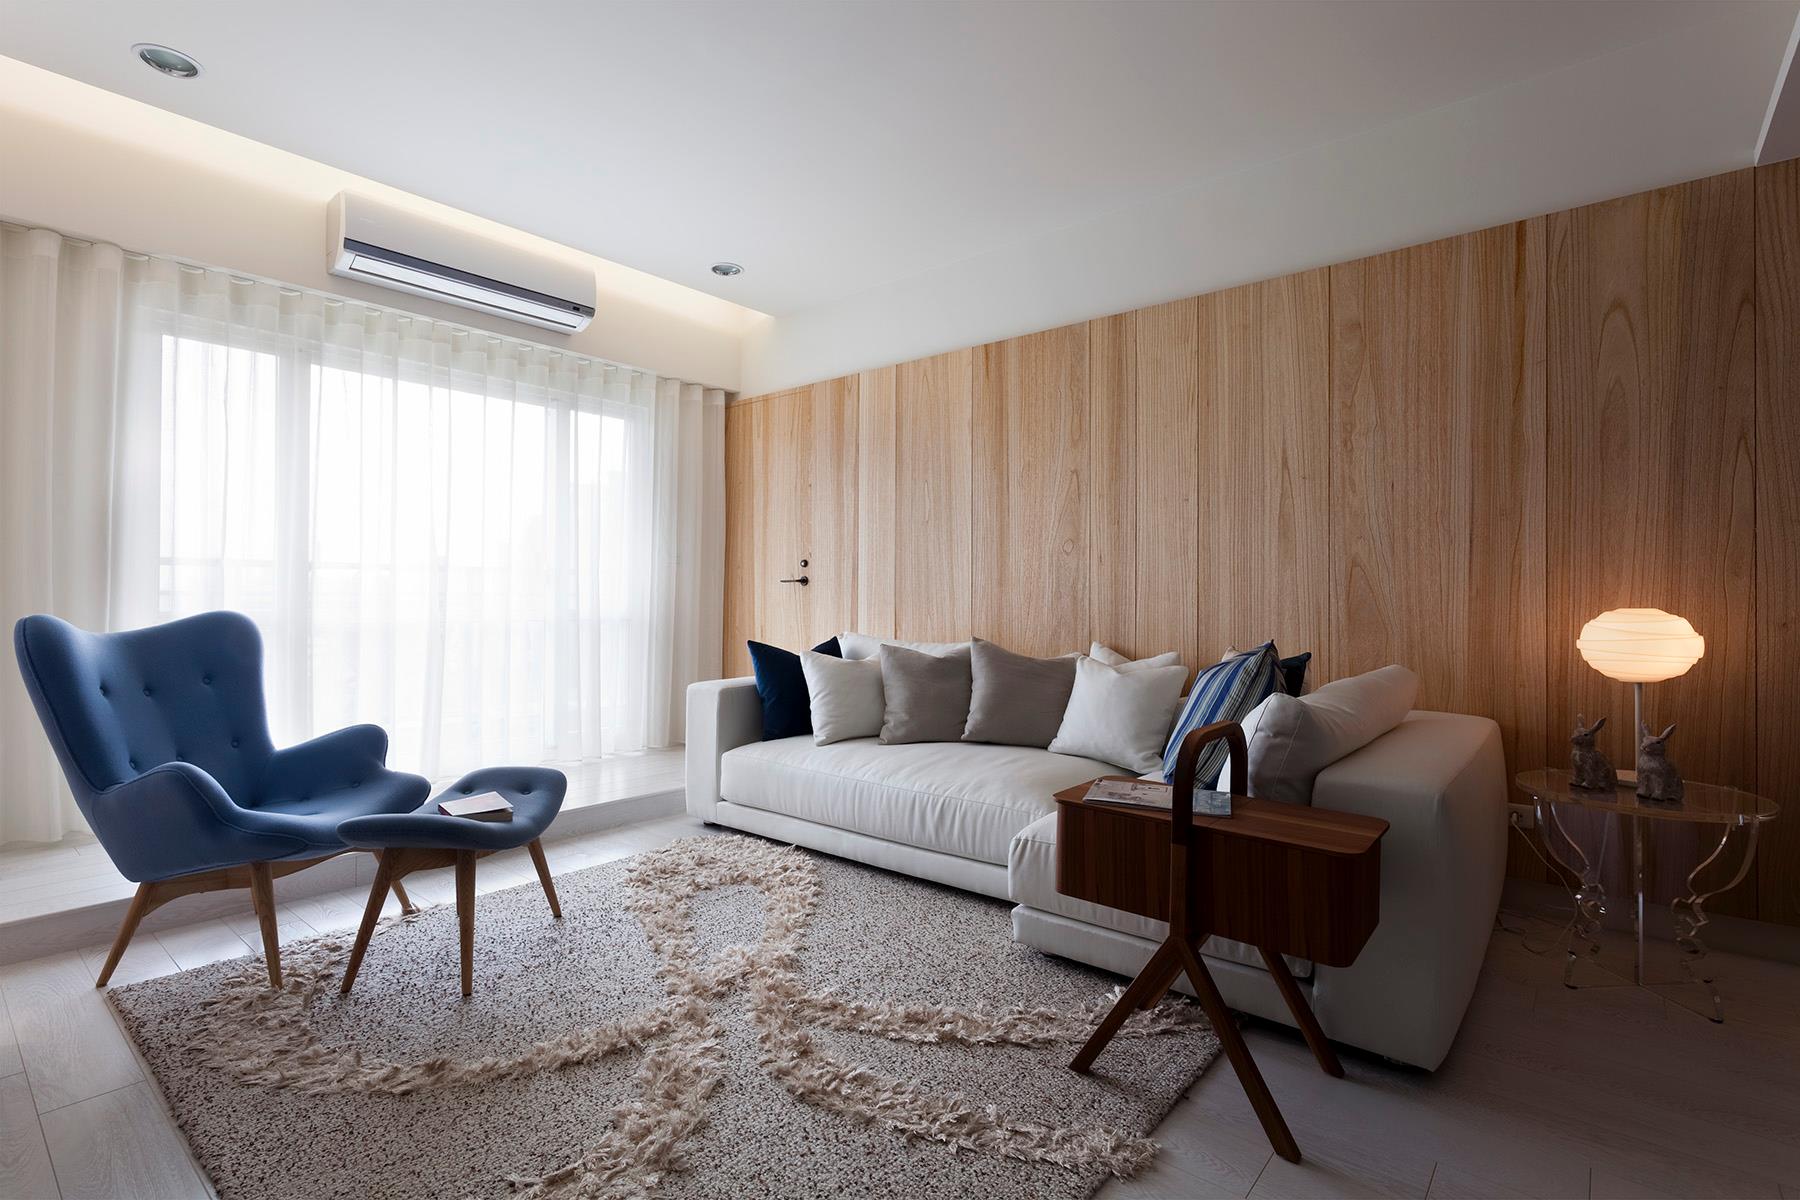 Some Stunningly Beautiful Examples Of Modern Asian Minimalistic Decor